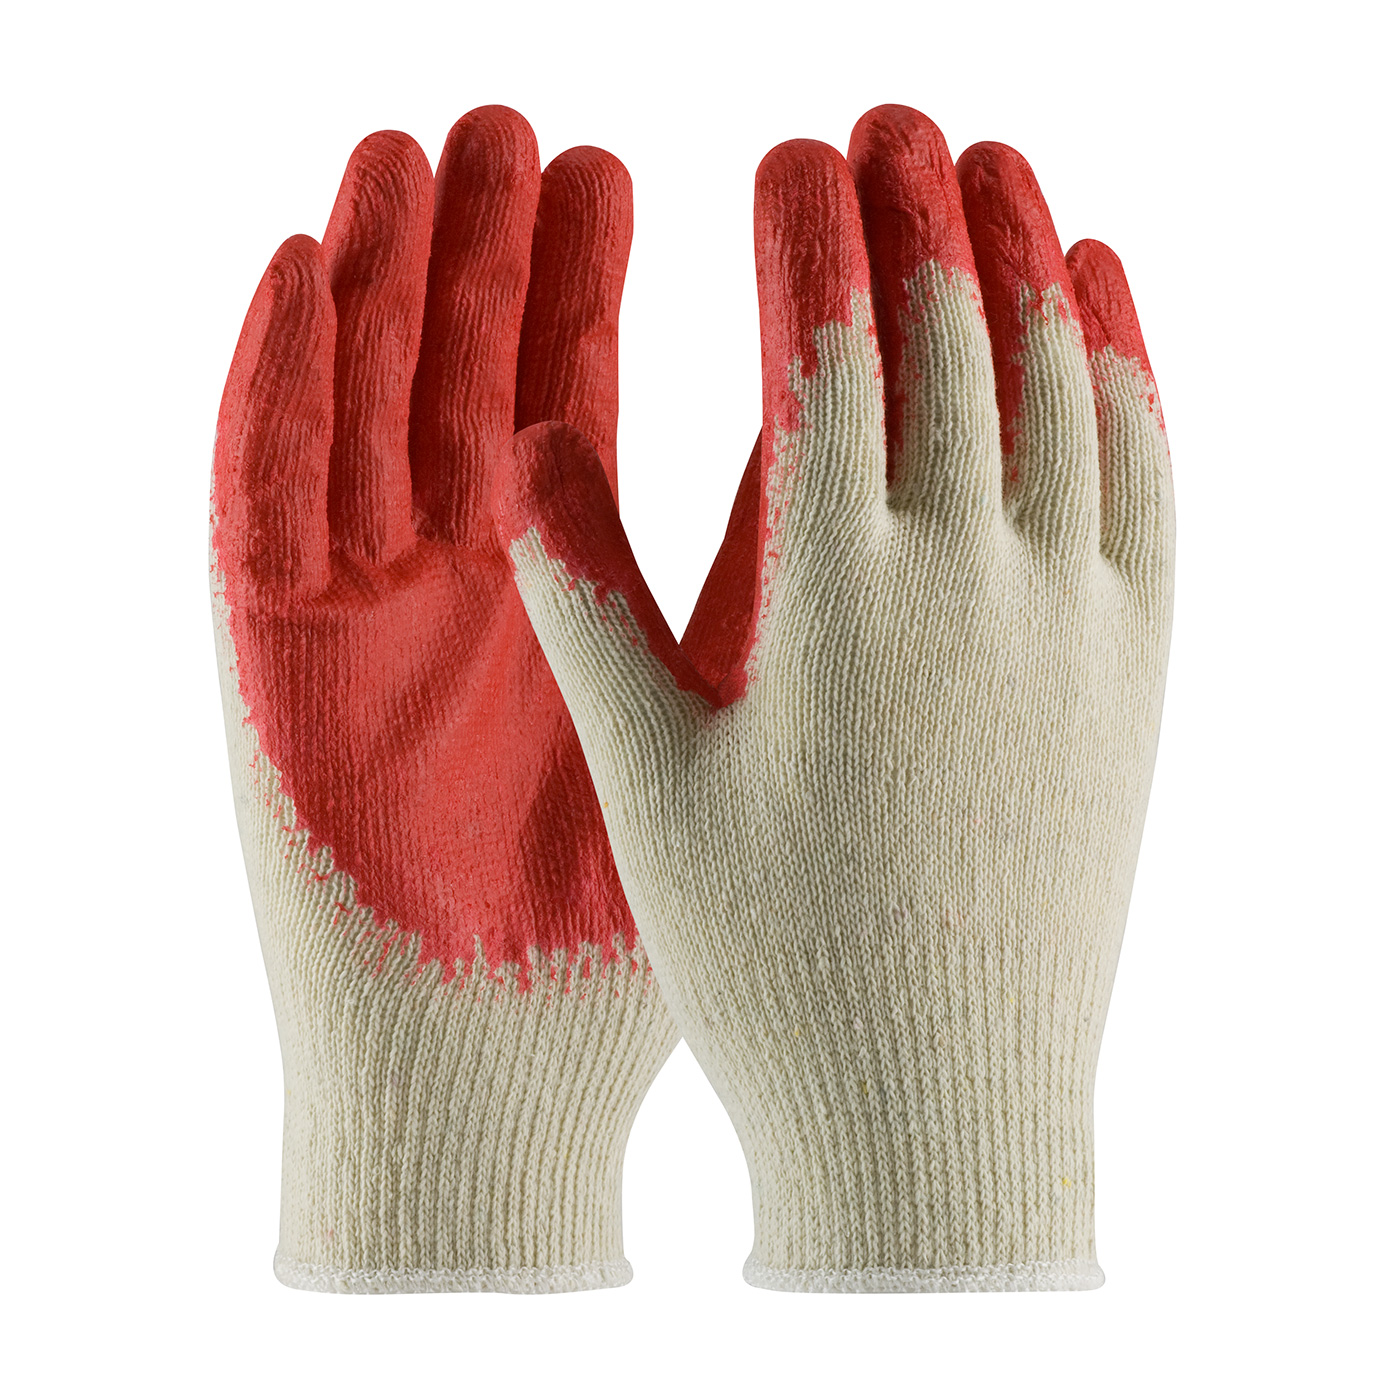 PIP 39-C122/L Seamless Knit Cotton/Polyester Glove with Latex Coated Smooth Grip on Palm & Fingers - Regular Grade - Large PID-39 C122 L